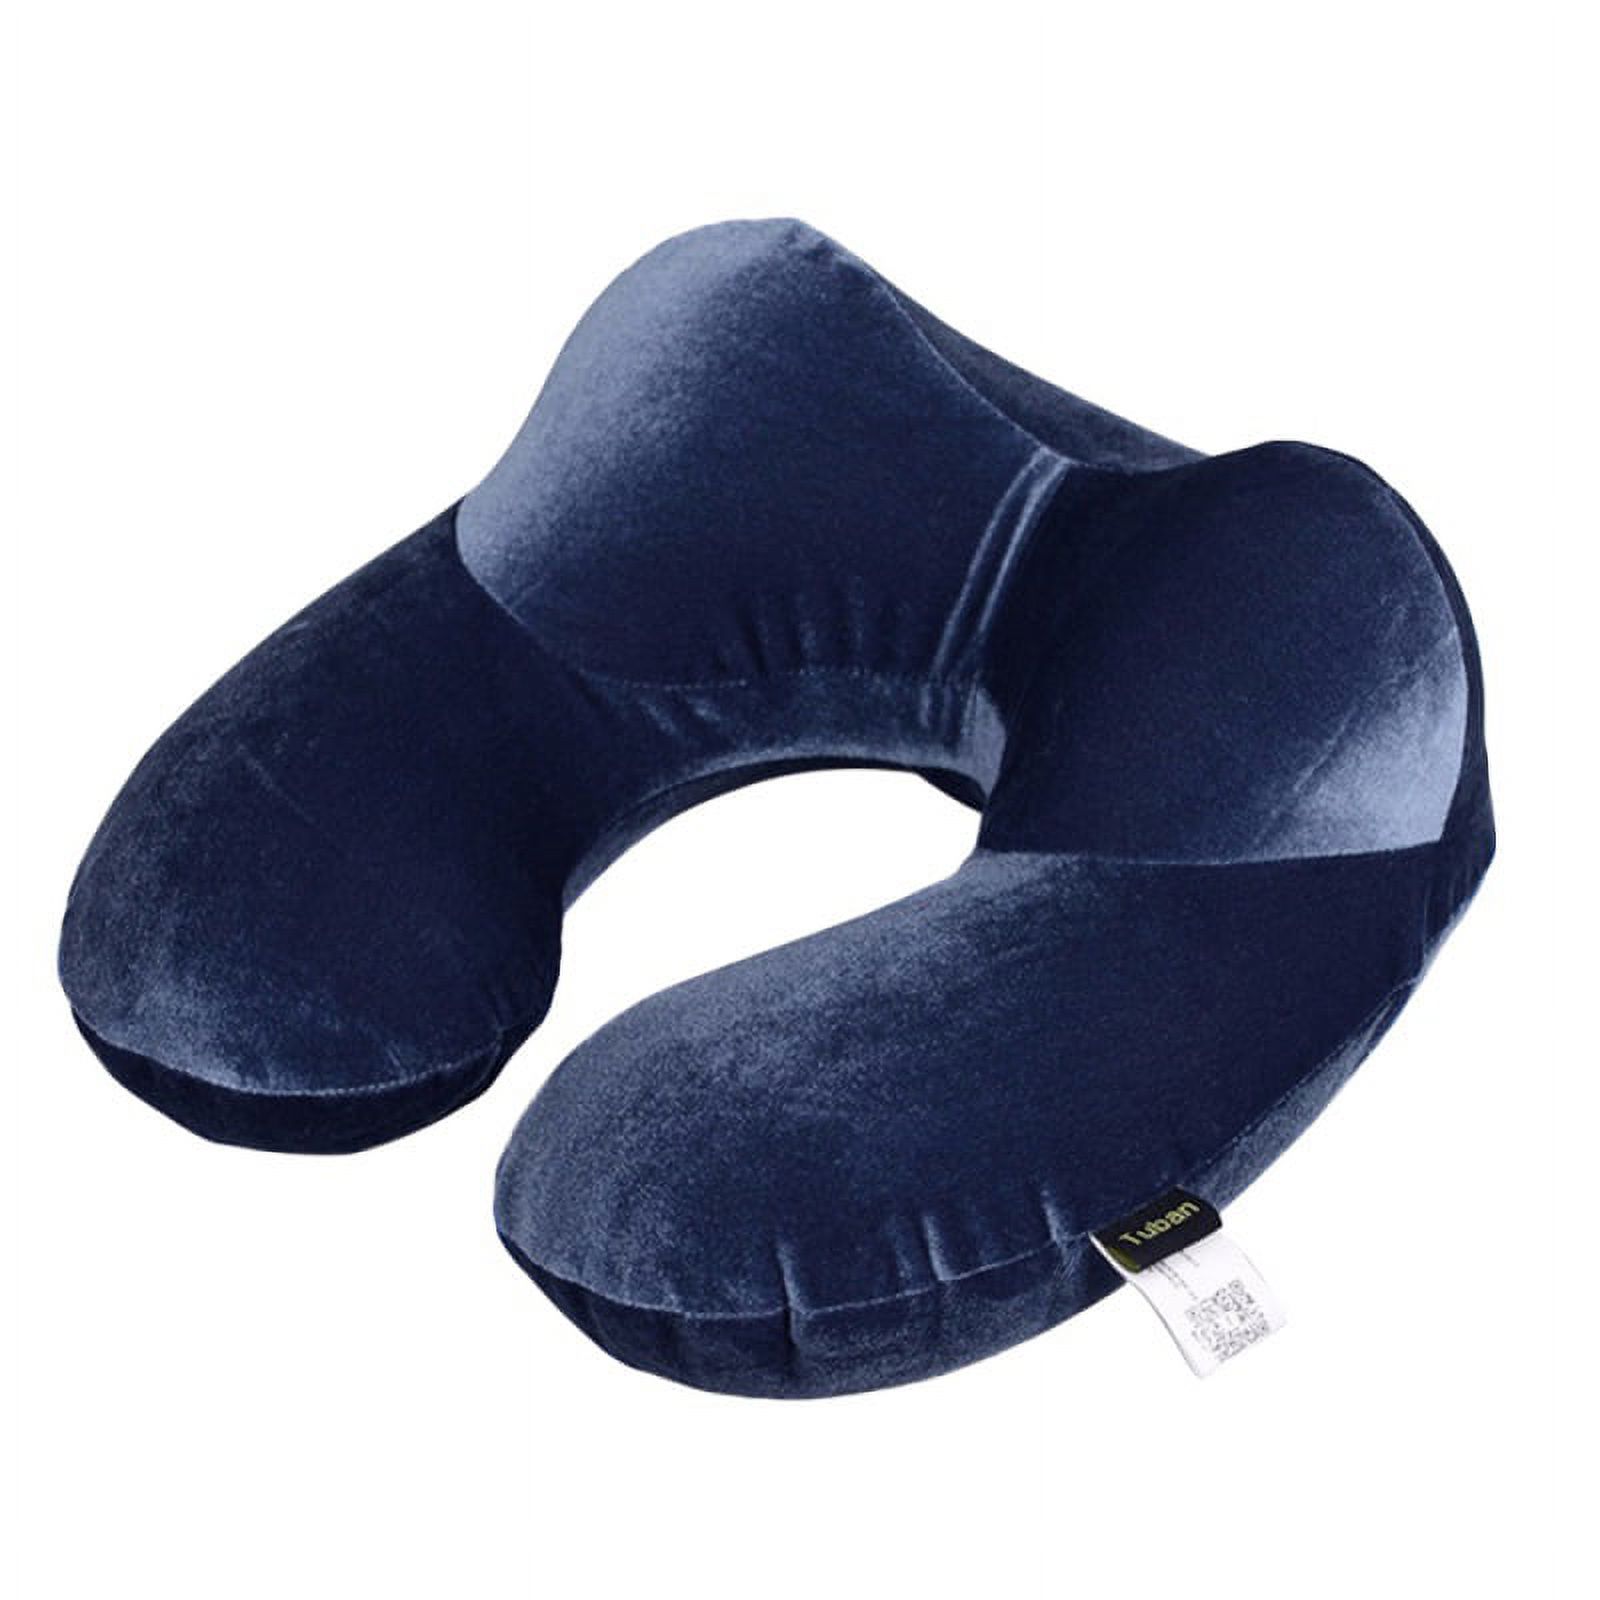 Inflatable Soft Velvet Travel Neck Pillow Set, U Shape, Neck Support for Cars, Airplanes Camping - image 1 of 5